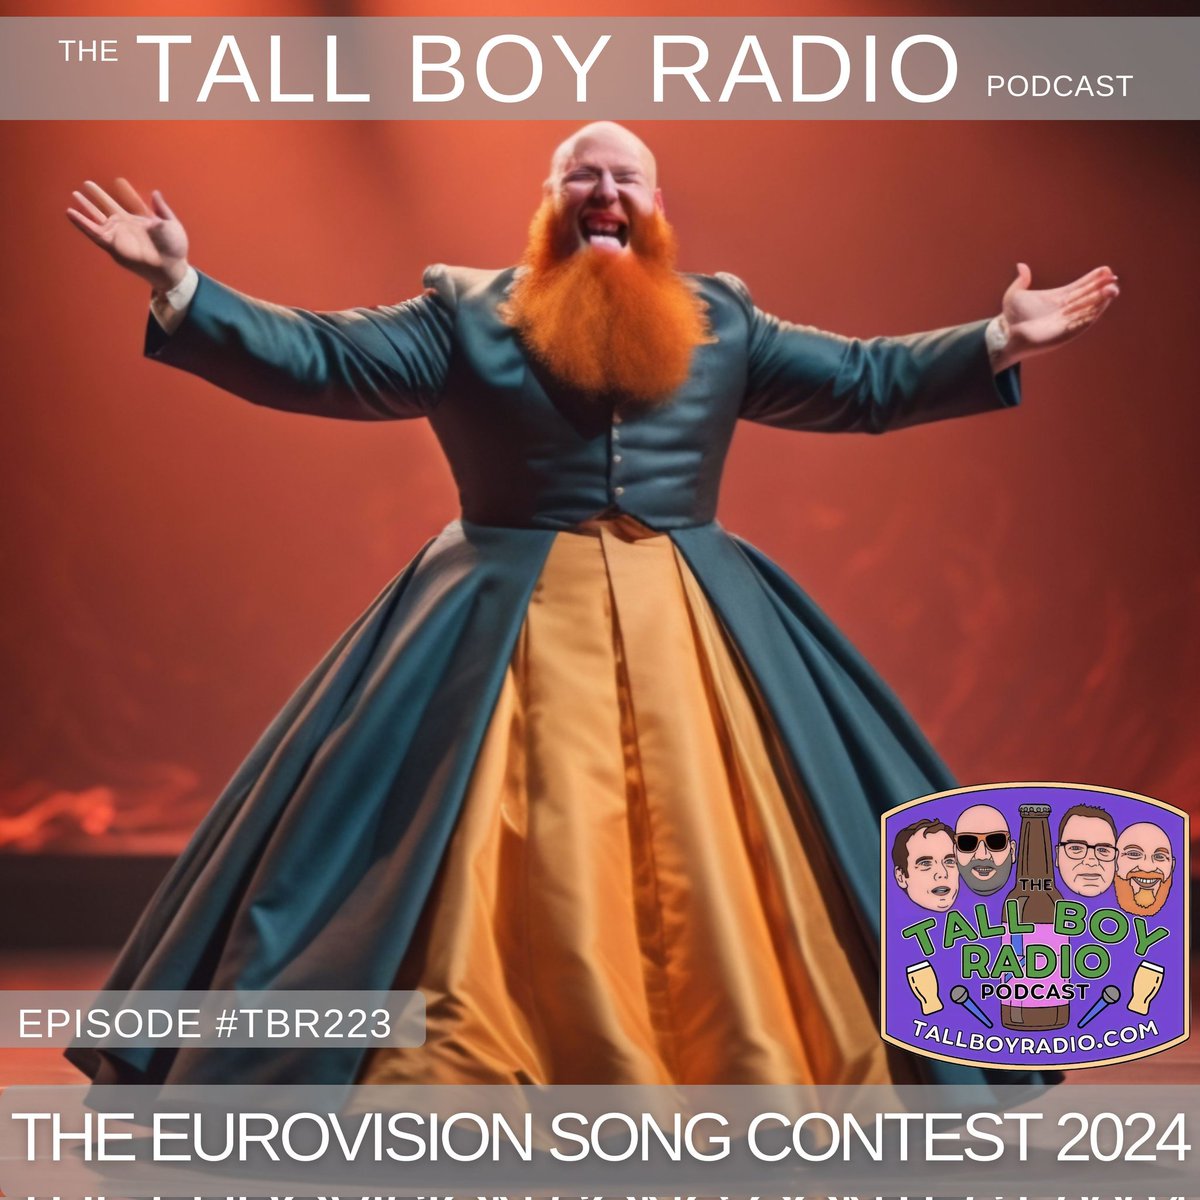 #TBR223 of the #TallBoyRadio #Podcast is #NowStreaming - we were joined by @GMDalthul and @sampixeldot to talk #Eurovision SPOTIFY open.spotify.com/episode/5HuJ2j… GOOGLE podcasts.google.com/feed/aHR0cHM6L… #TBR #PodNation #PodernFamily tallboyradio.com